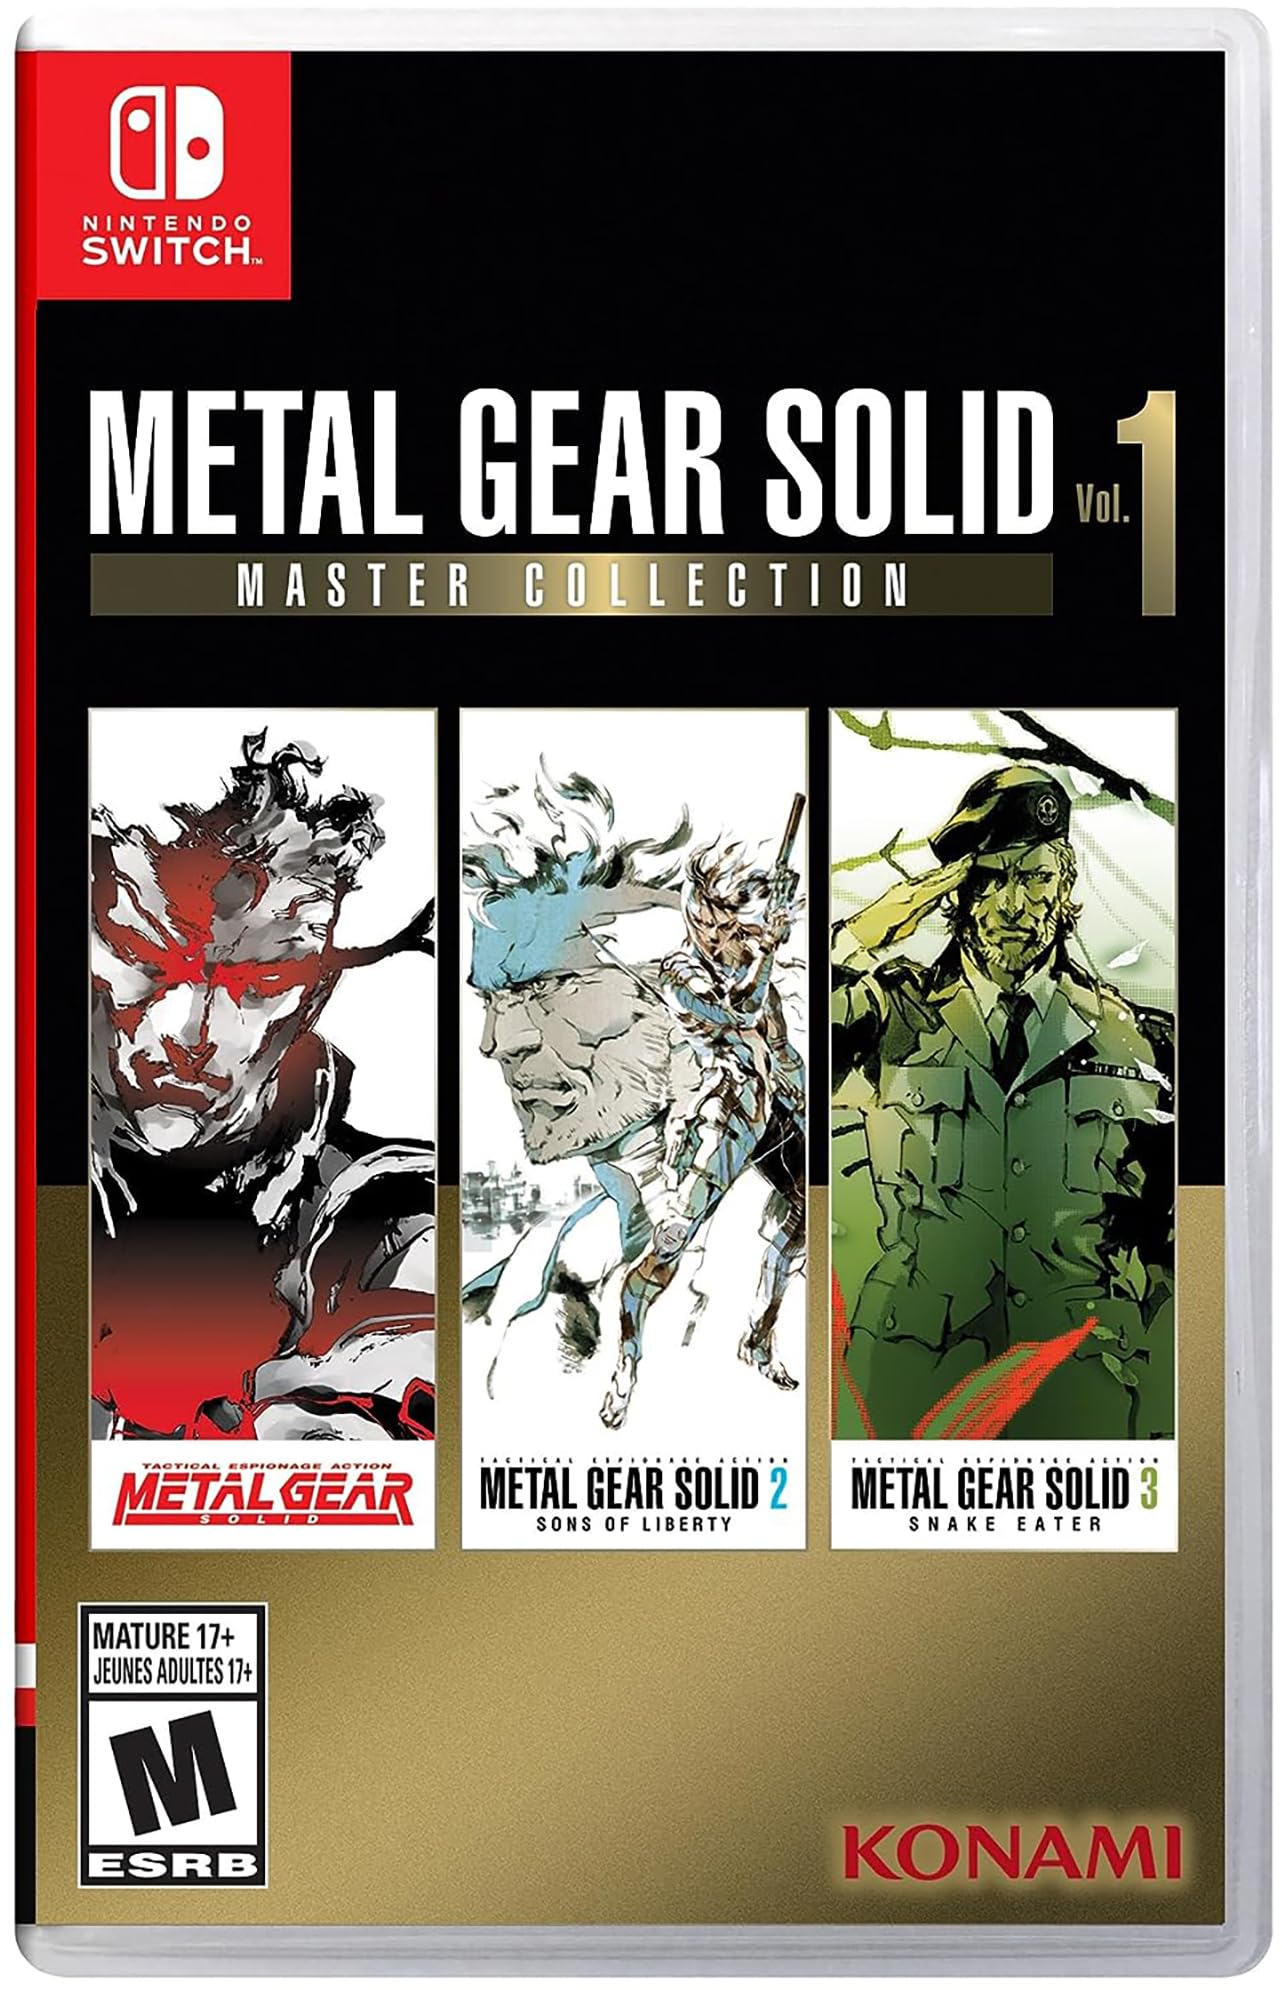 Metal Gear Solid: Master Collection Vol.1 (Nintendo Switch) $37.60 + Free Shipping